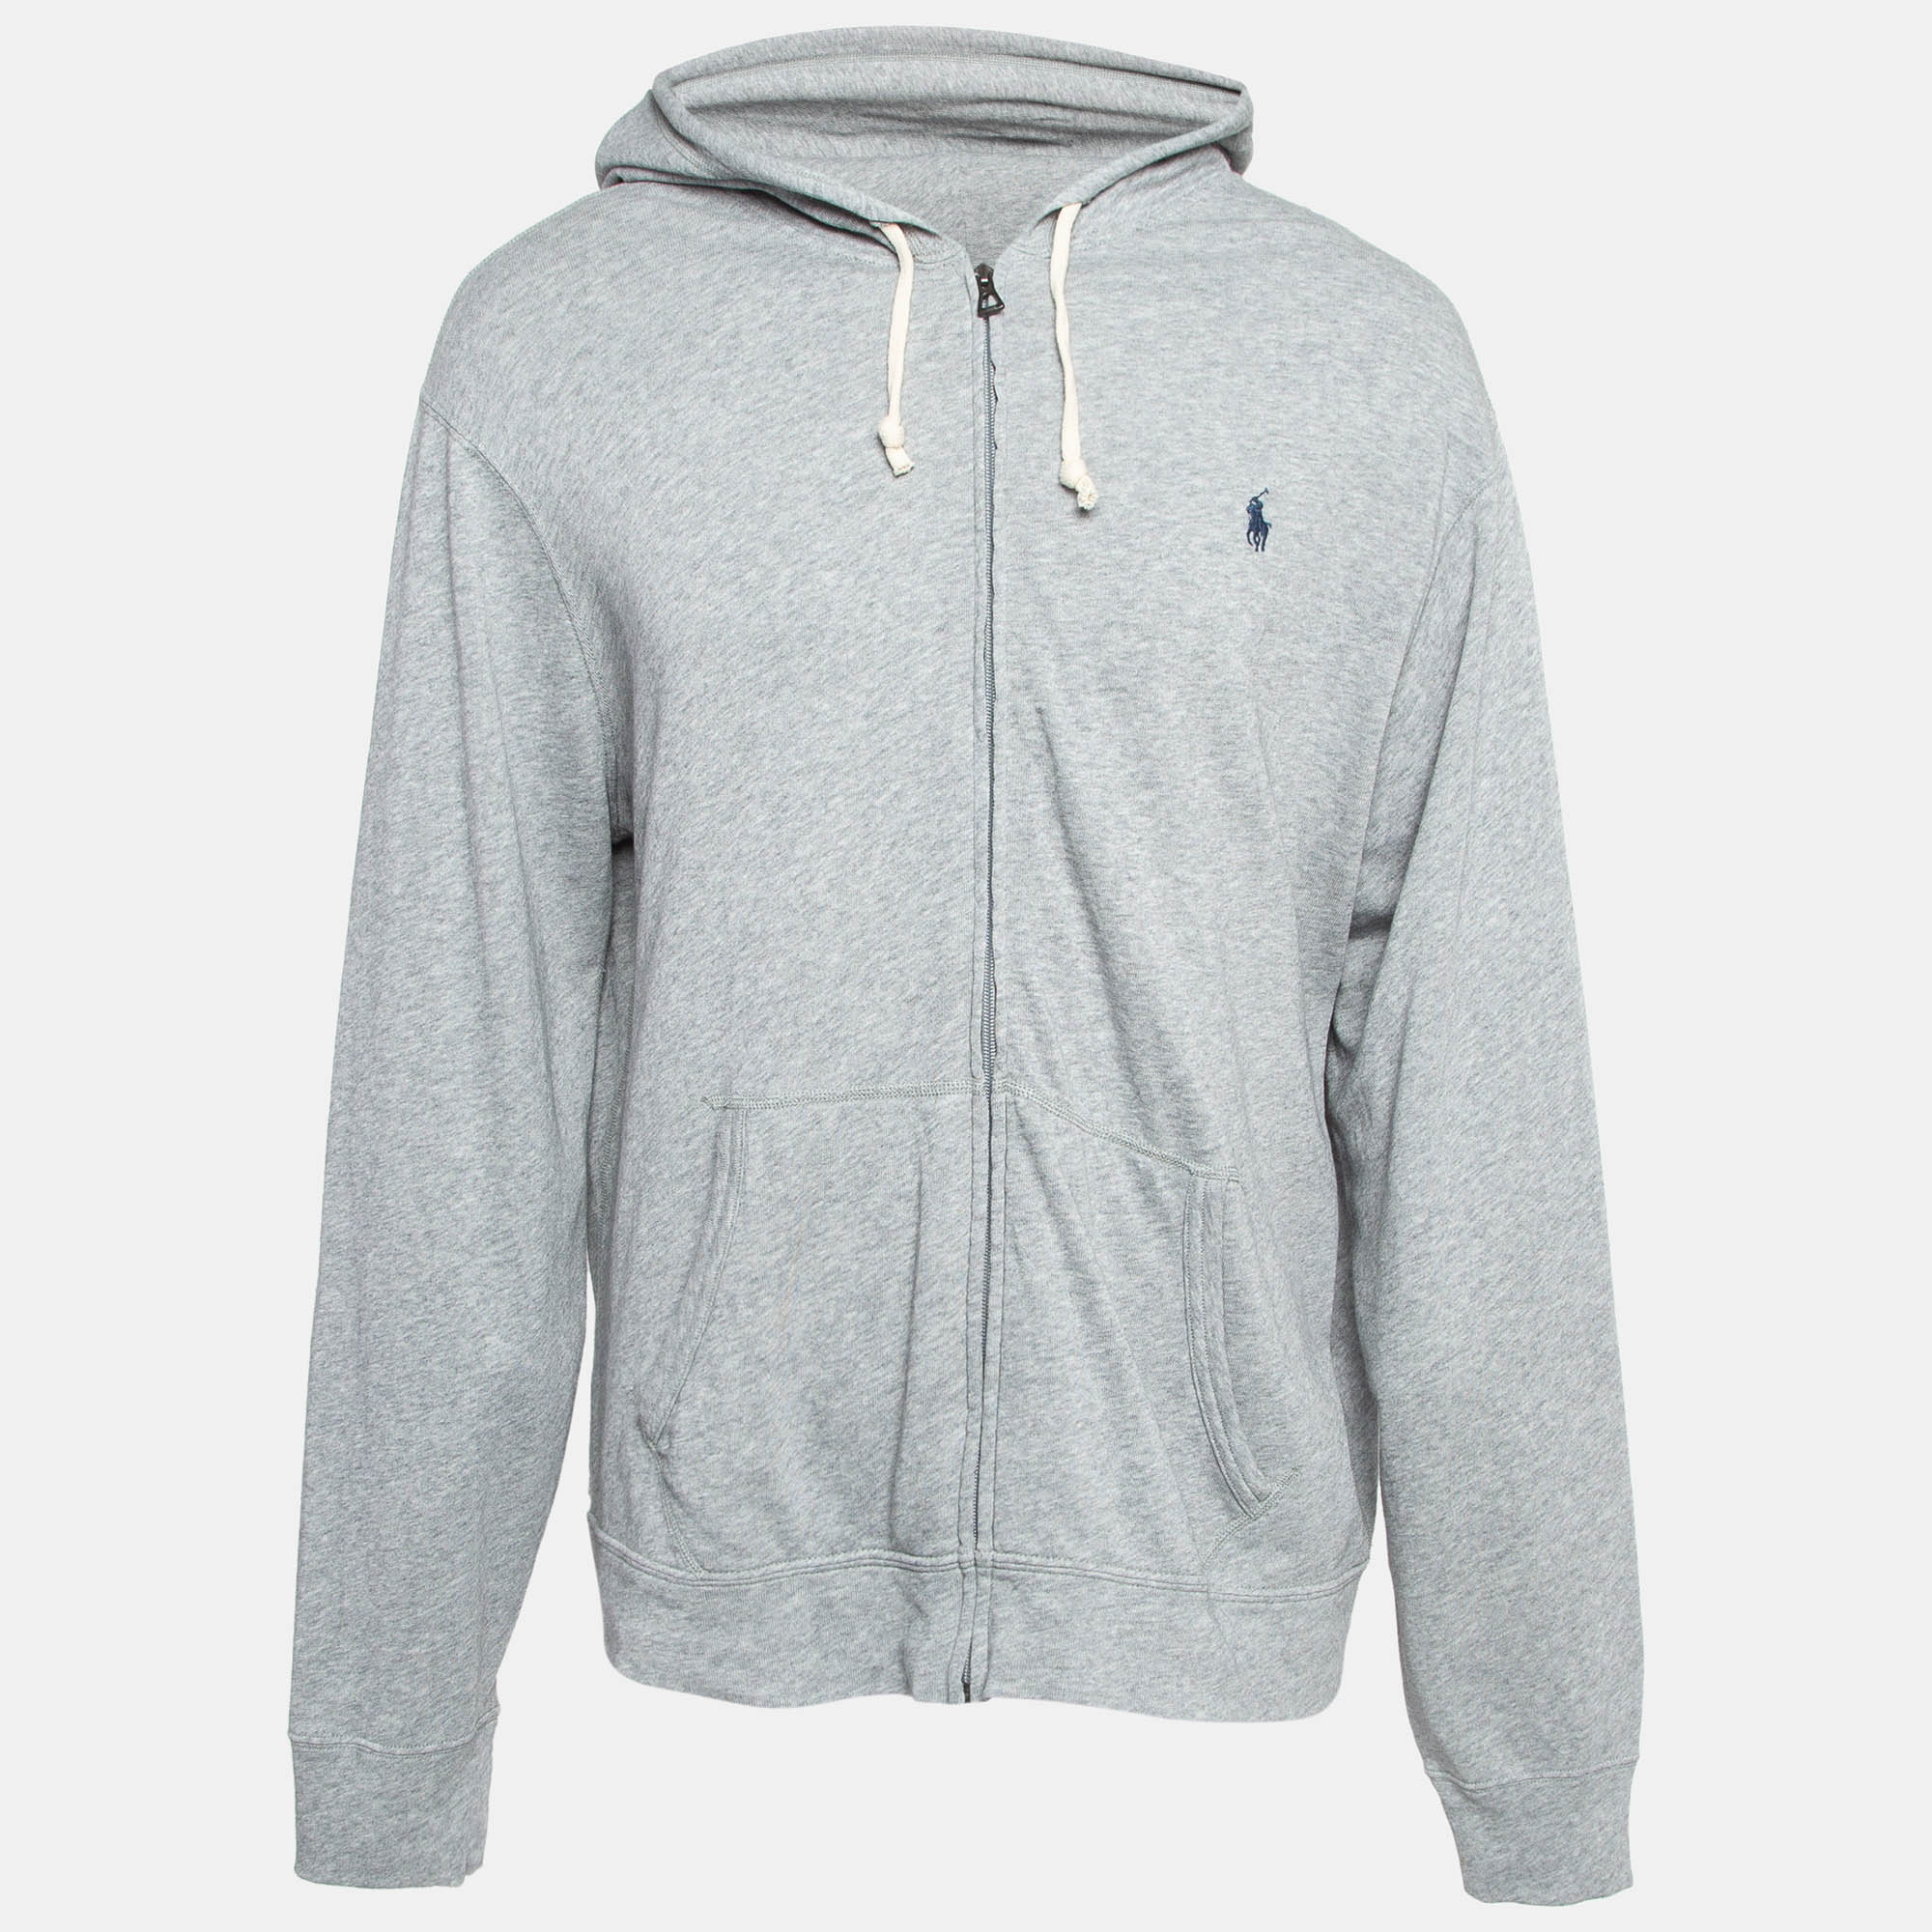 This hoodie is all about sporting a classy and comfy style. It is tailored from soft fabric which is highlighted with signature accents.